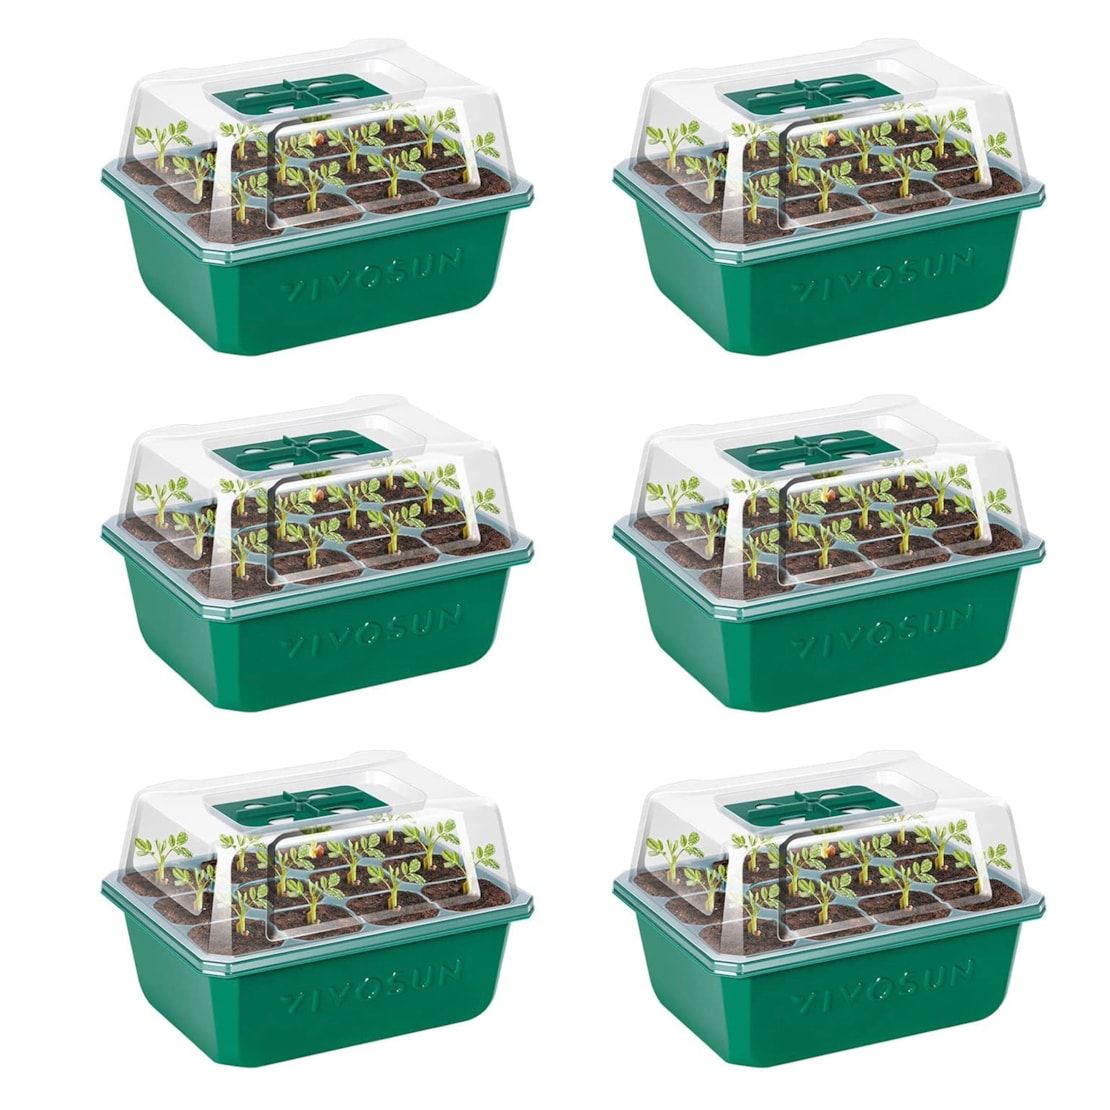 VIVOSUN 6-Pack Seed Starter Trays, 72-Cell Seed Starter Kit with Humidity Dome